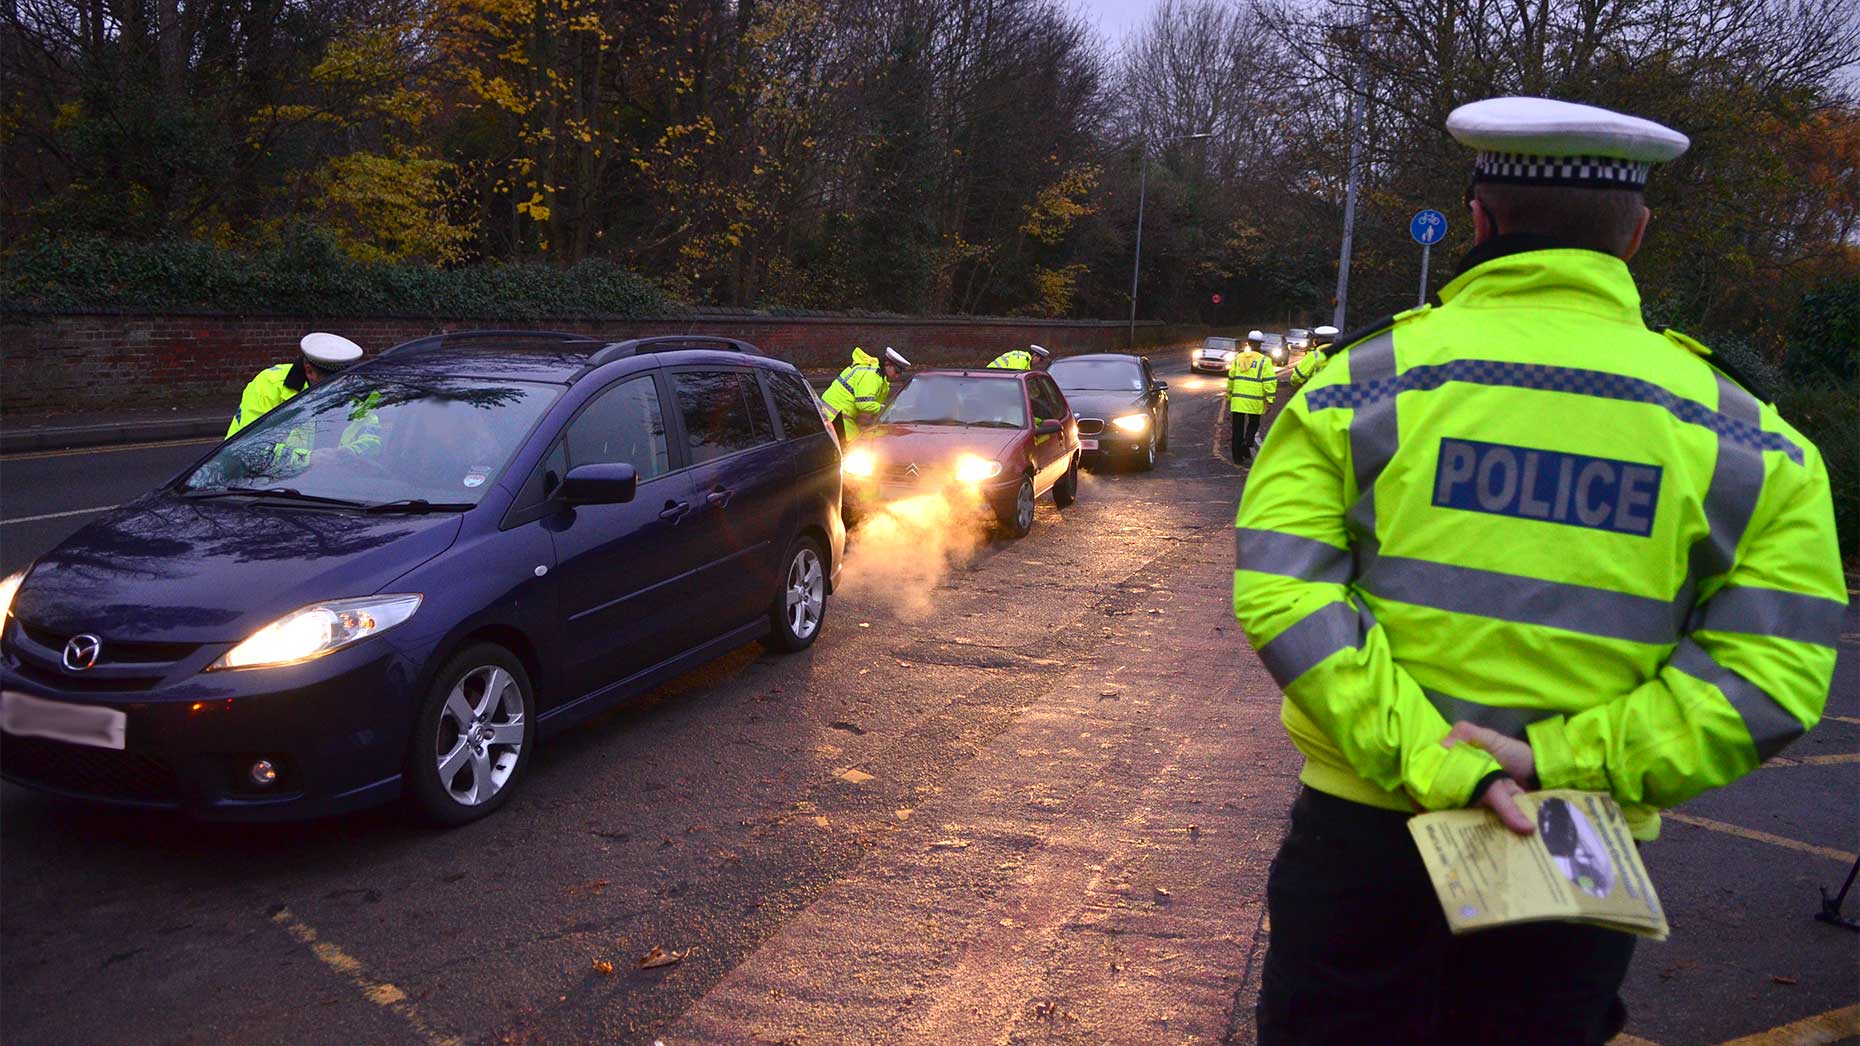 Lincolnshire Police conducting breath tests as part of their annual drink driving campaign. Photo: Steve Smailes for The Lincolnite